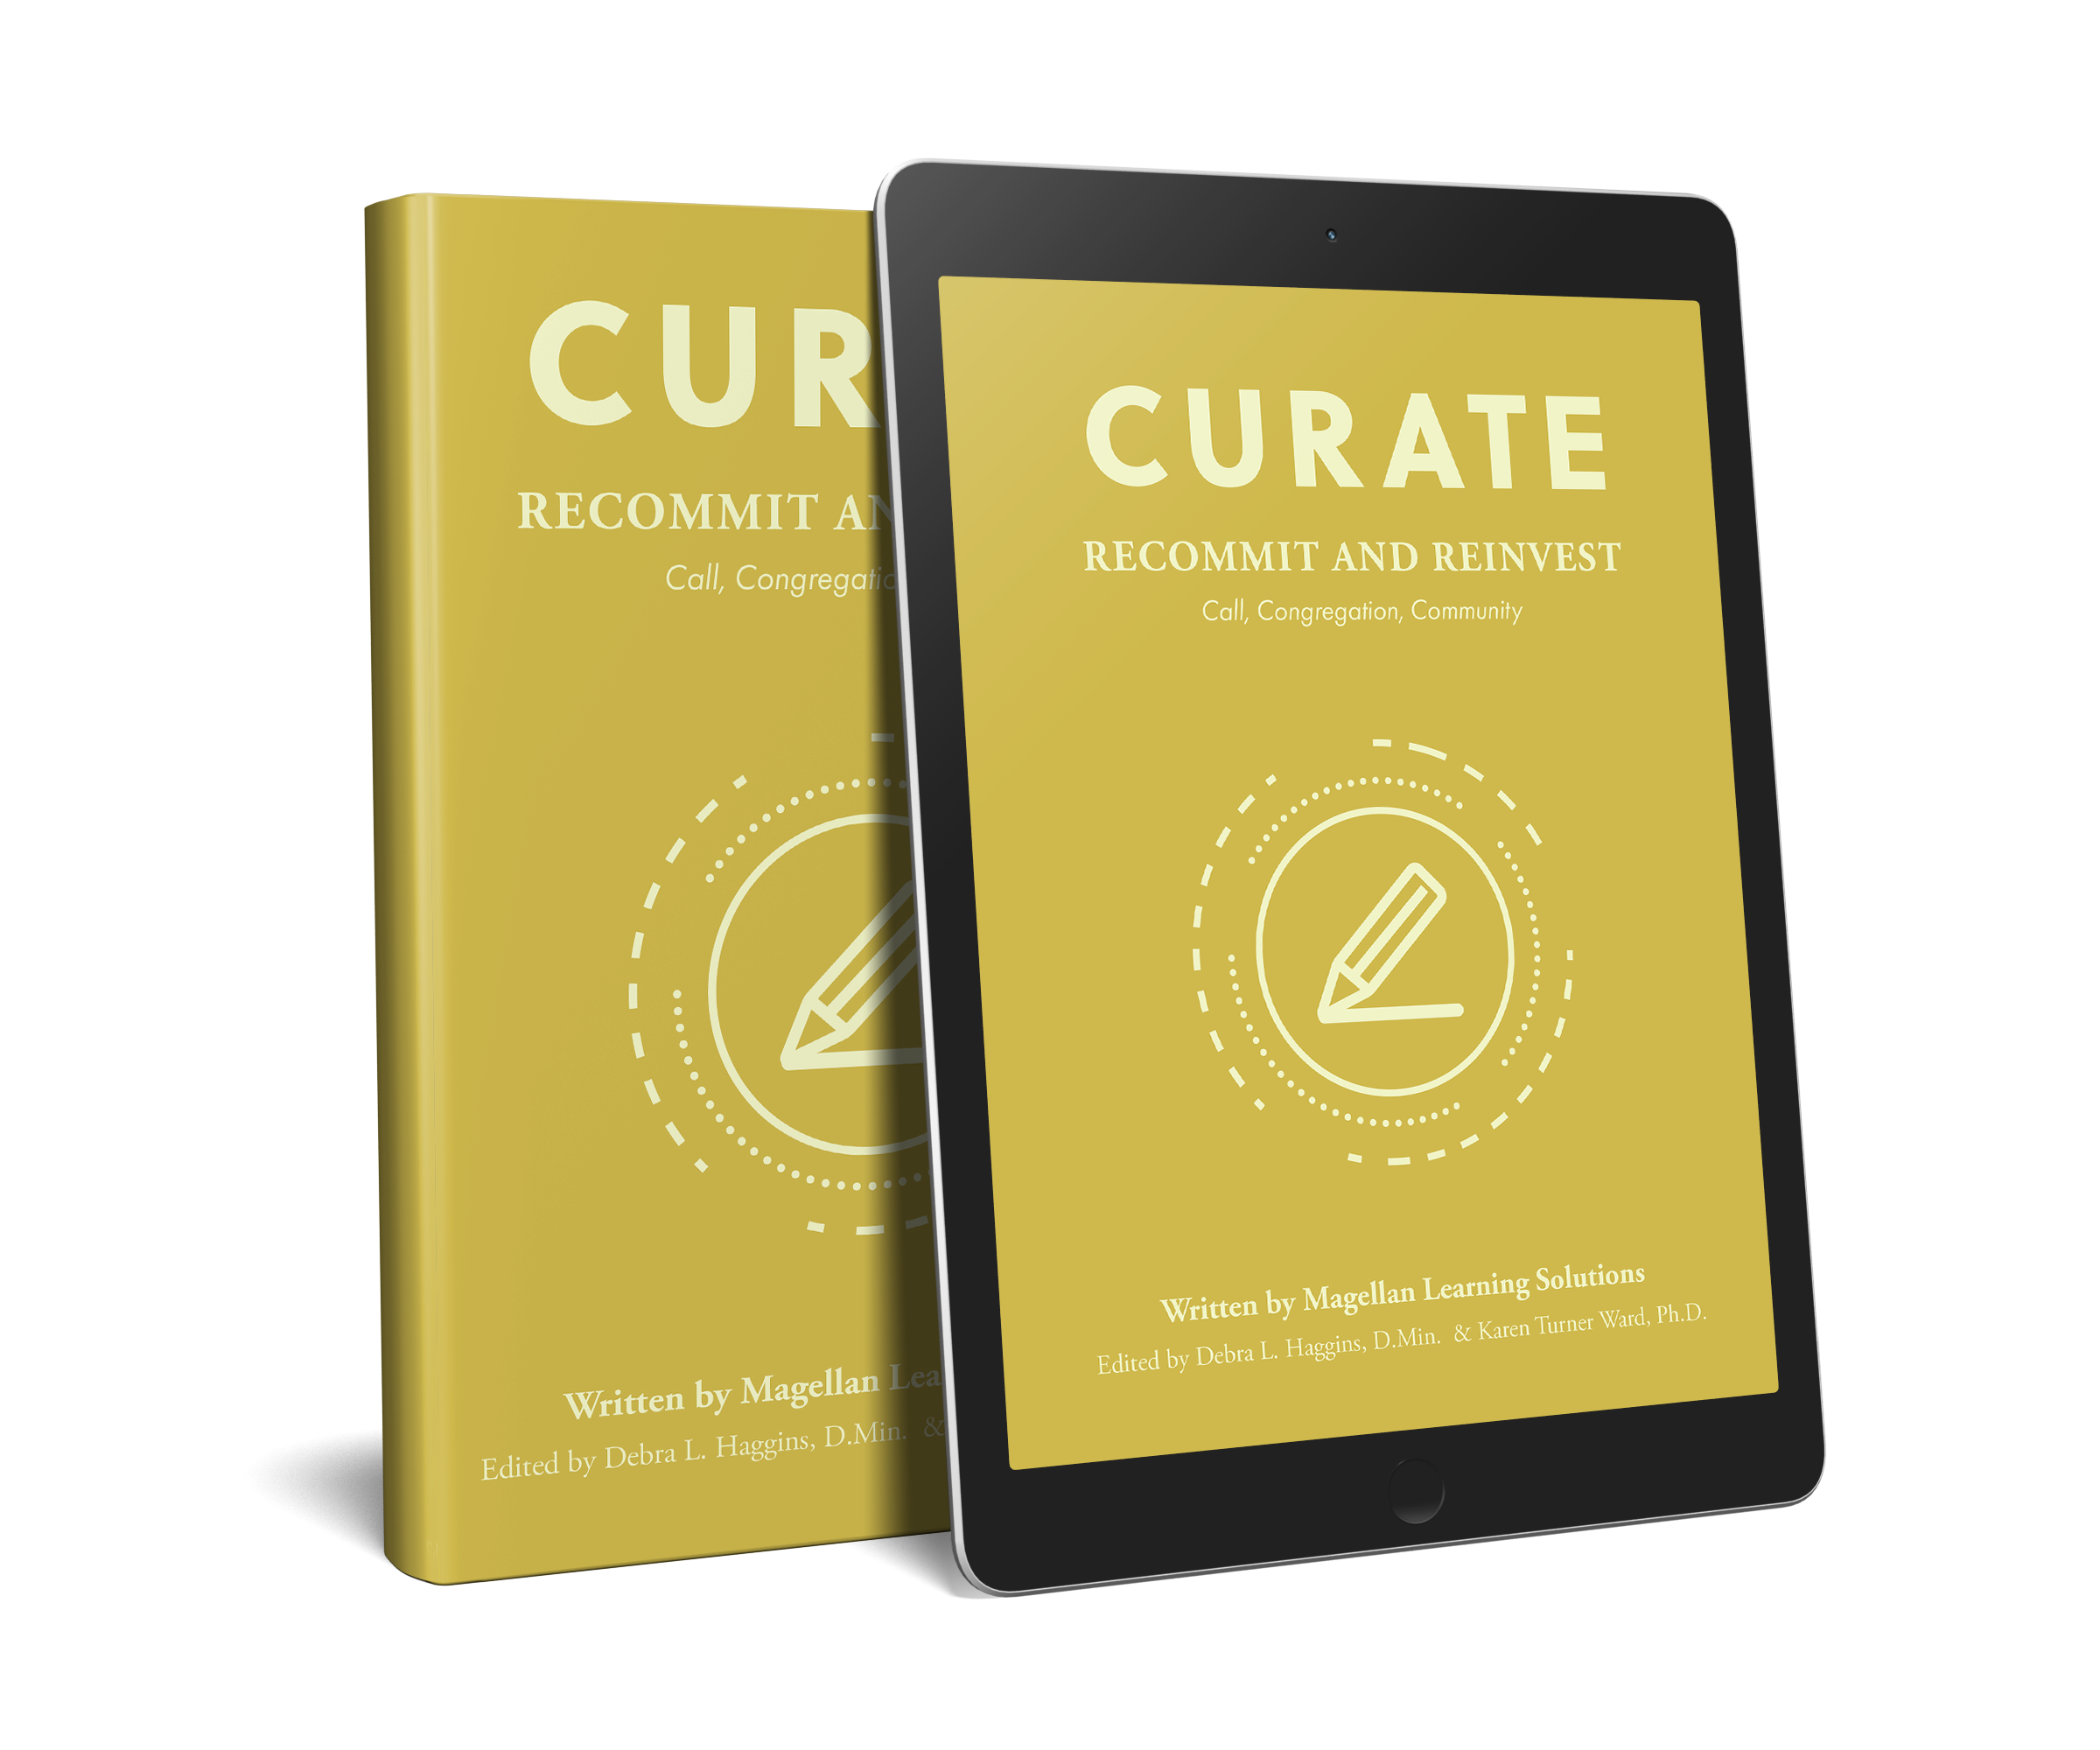 Curate: Recommit and Reinvest ebook